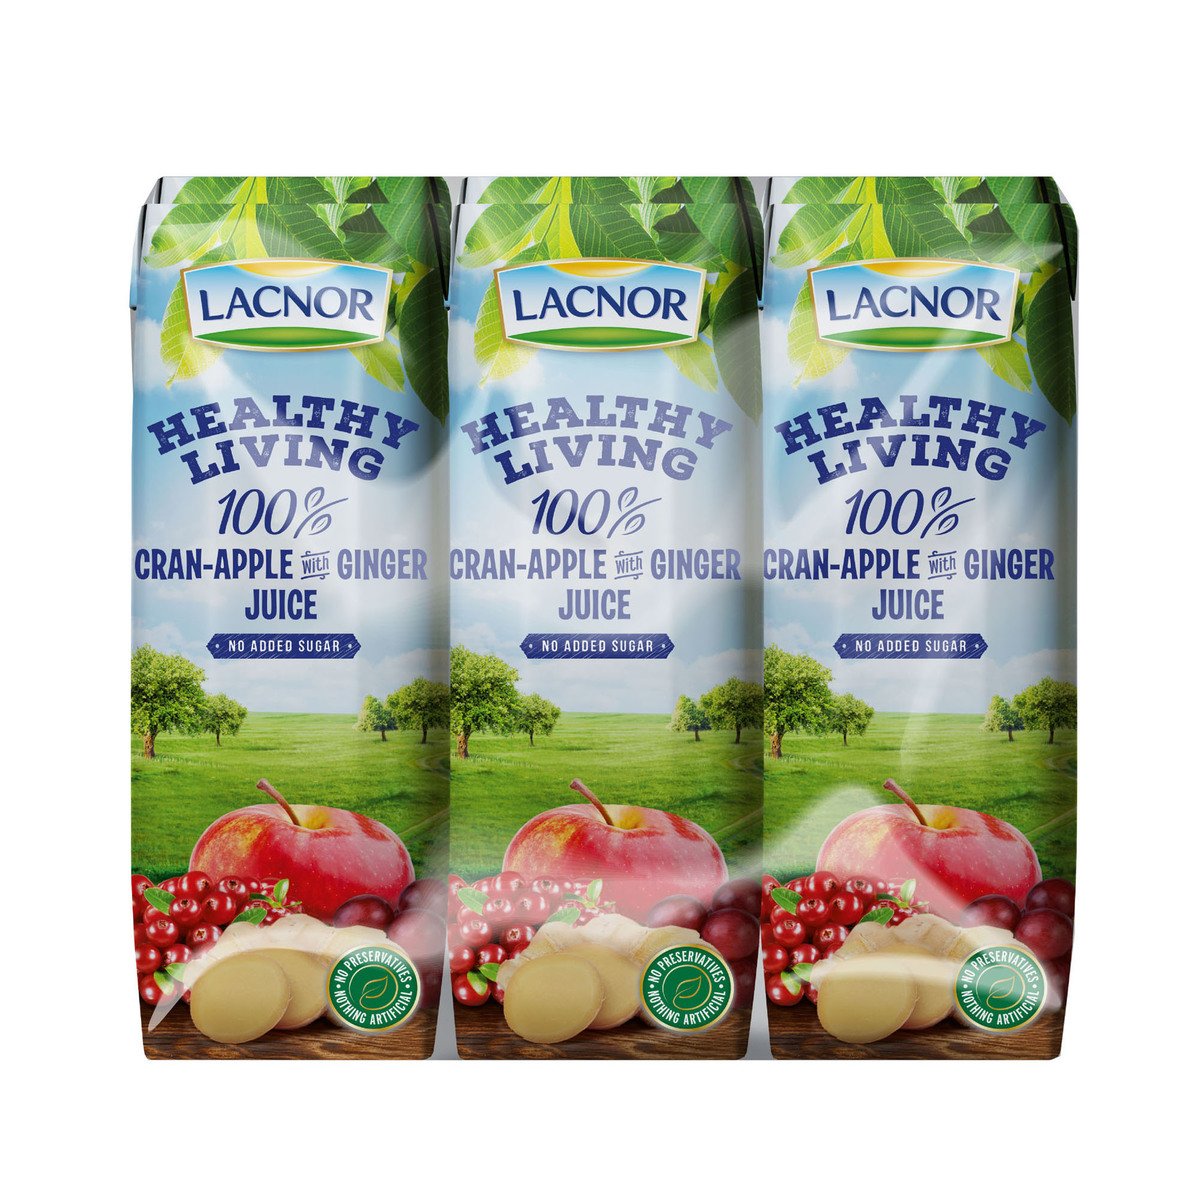 Lacnor Healthy Living Cran-Apple with Ginger Juice 6 x 250 ml